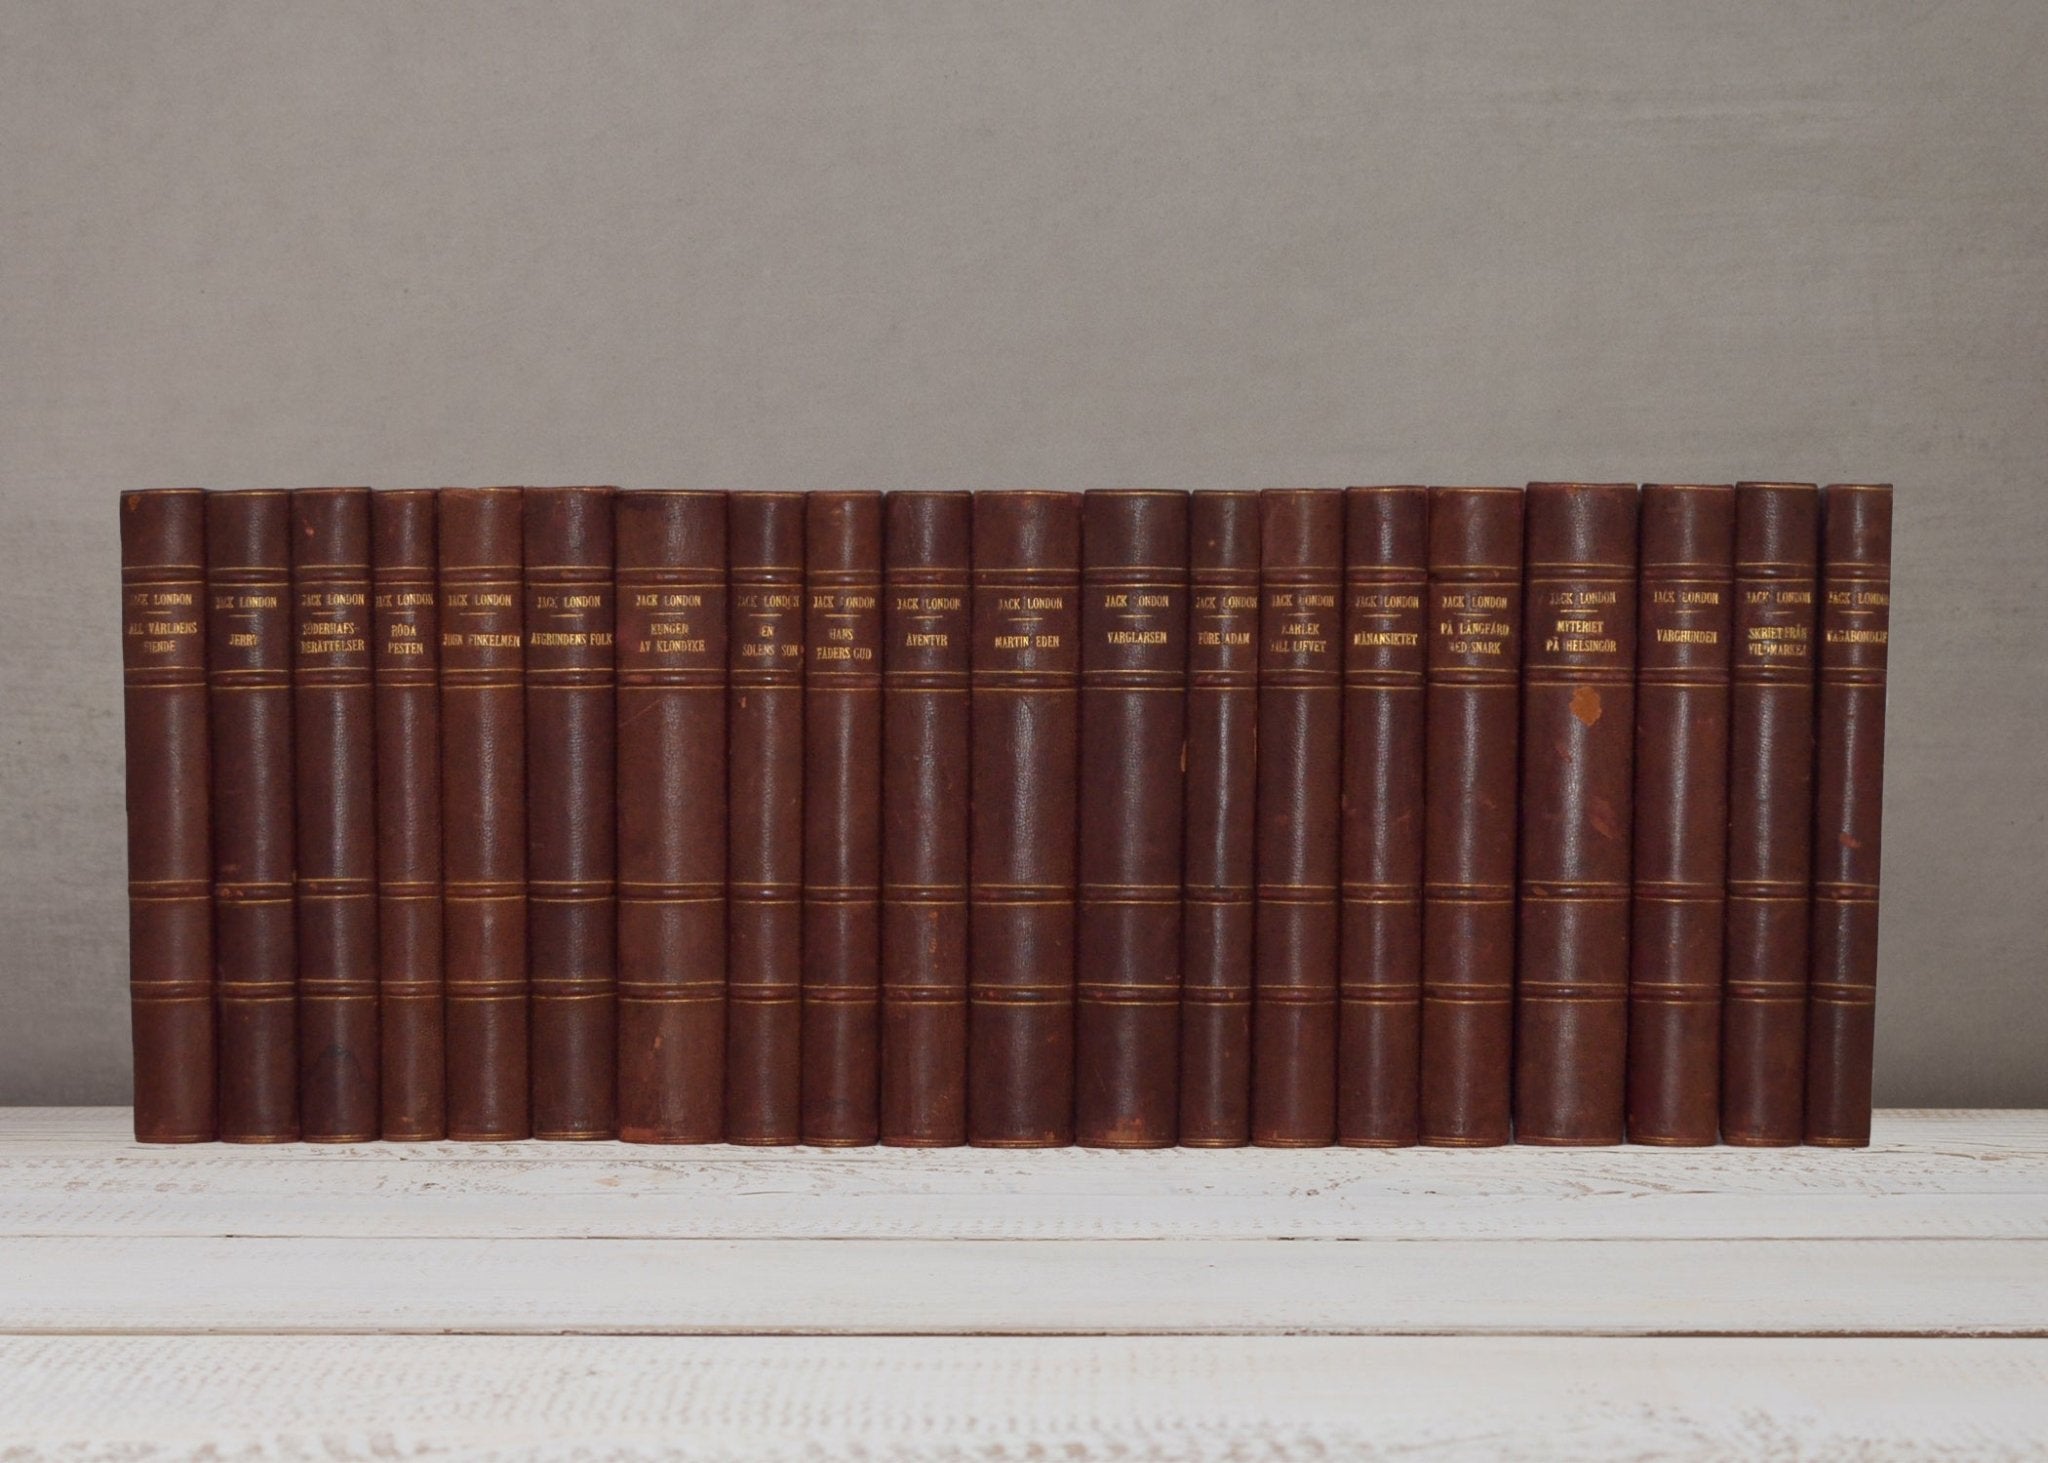 Antique Leather Bound Book Décor – Brown & Maroon Works of Jack London – Swedish - Brookfield Books